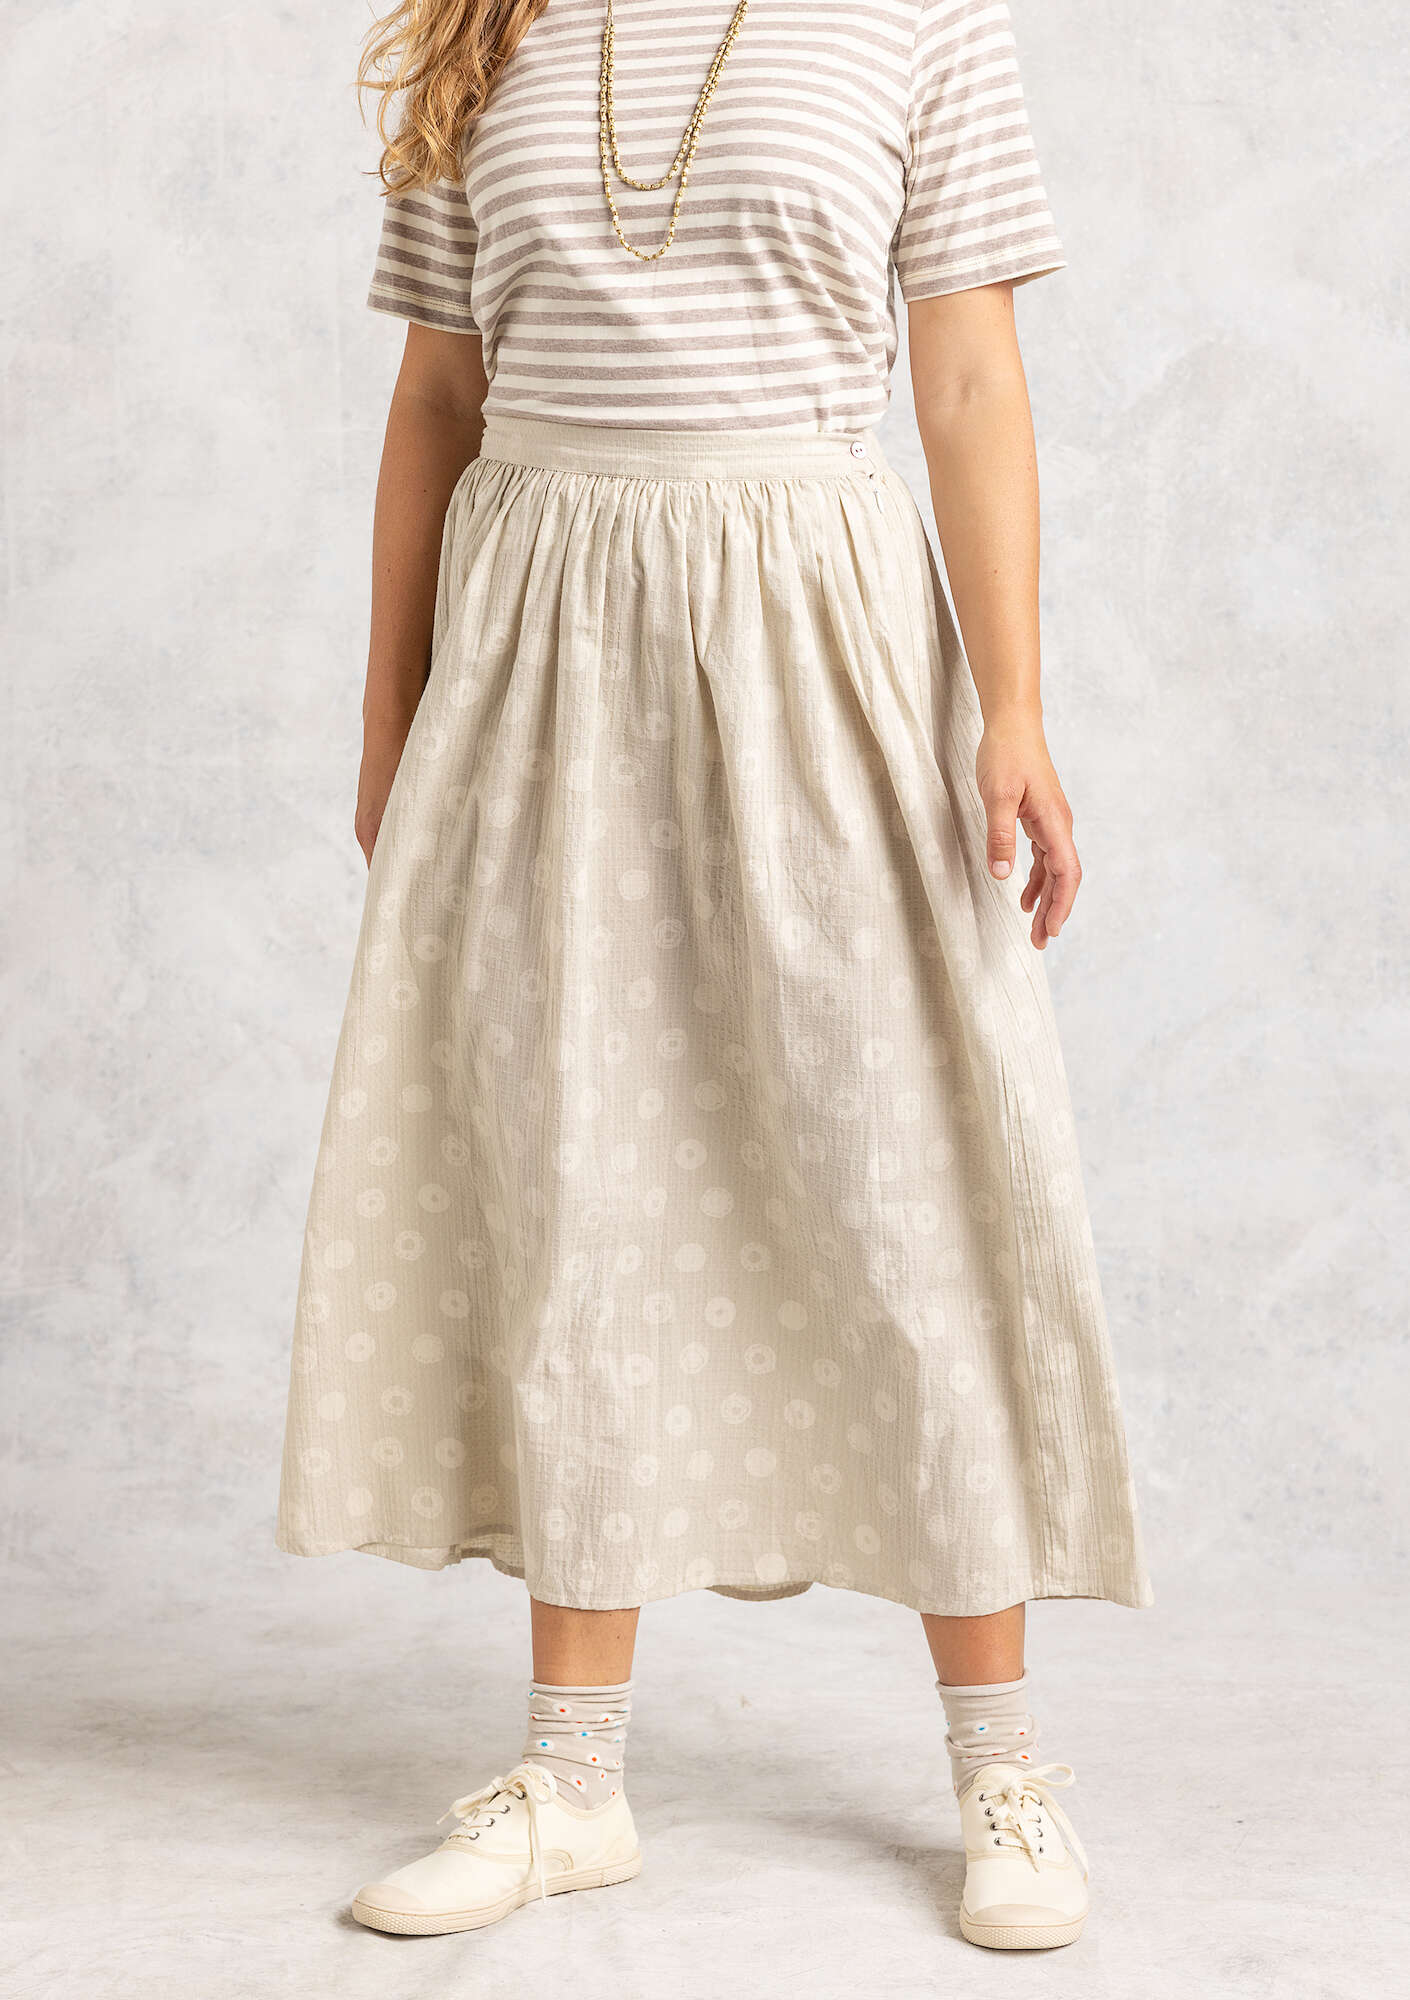 “Hilda” woven skirt in organic cotton natural/patterned